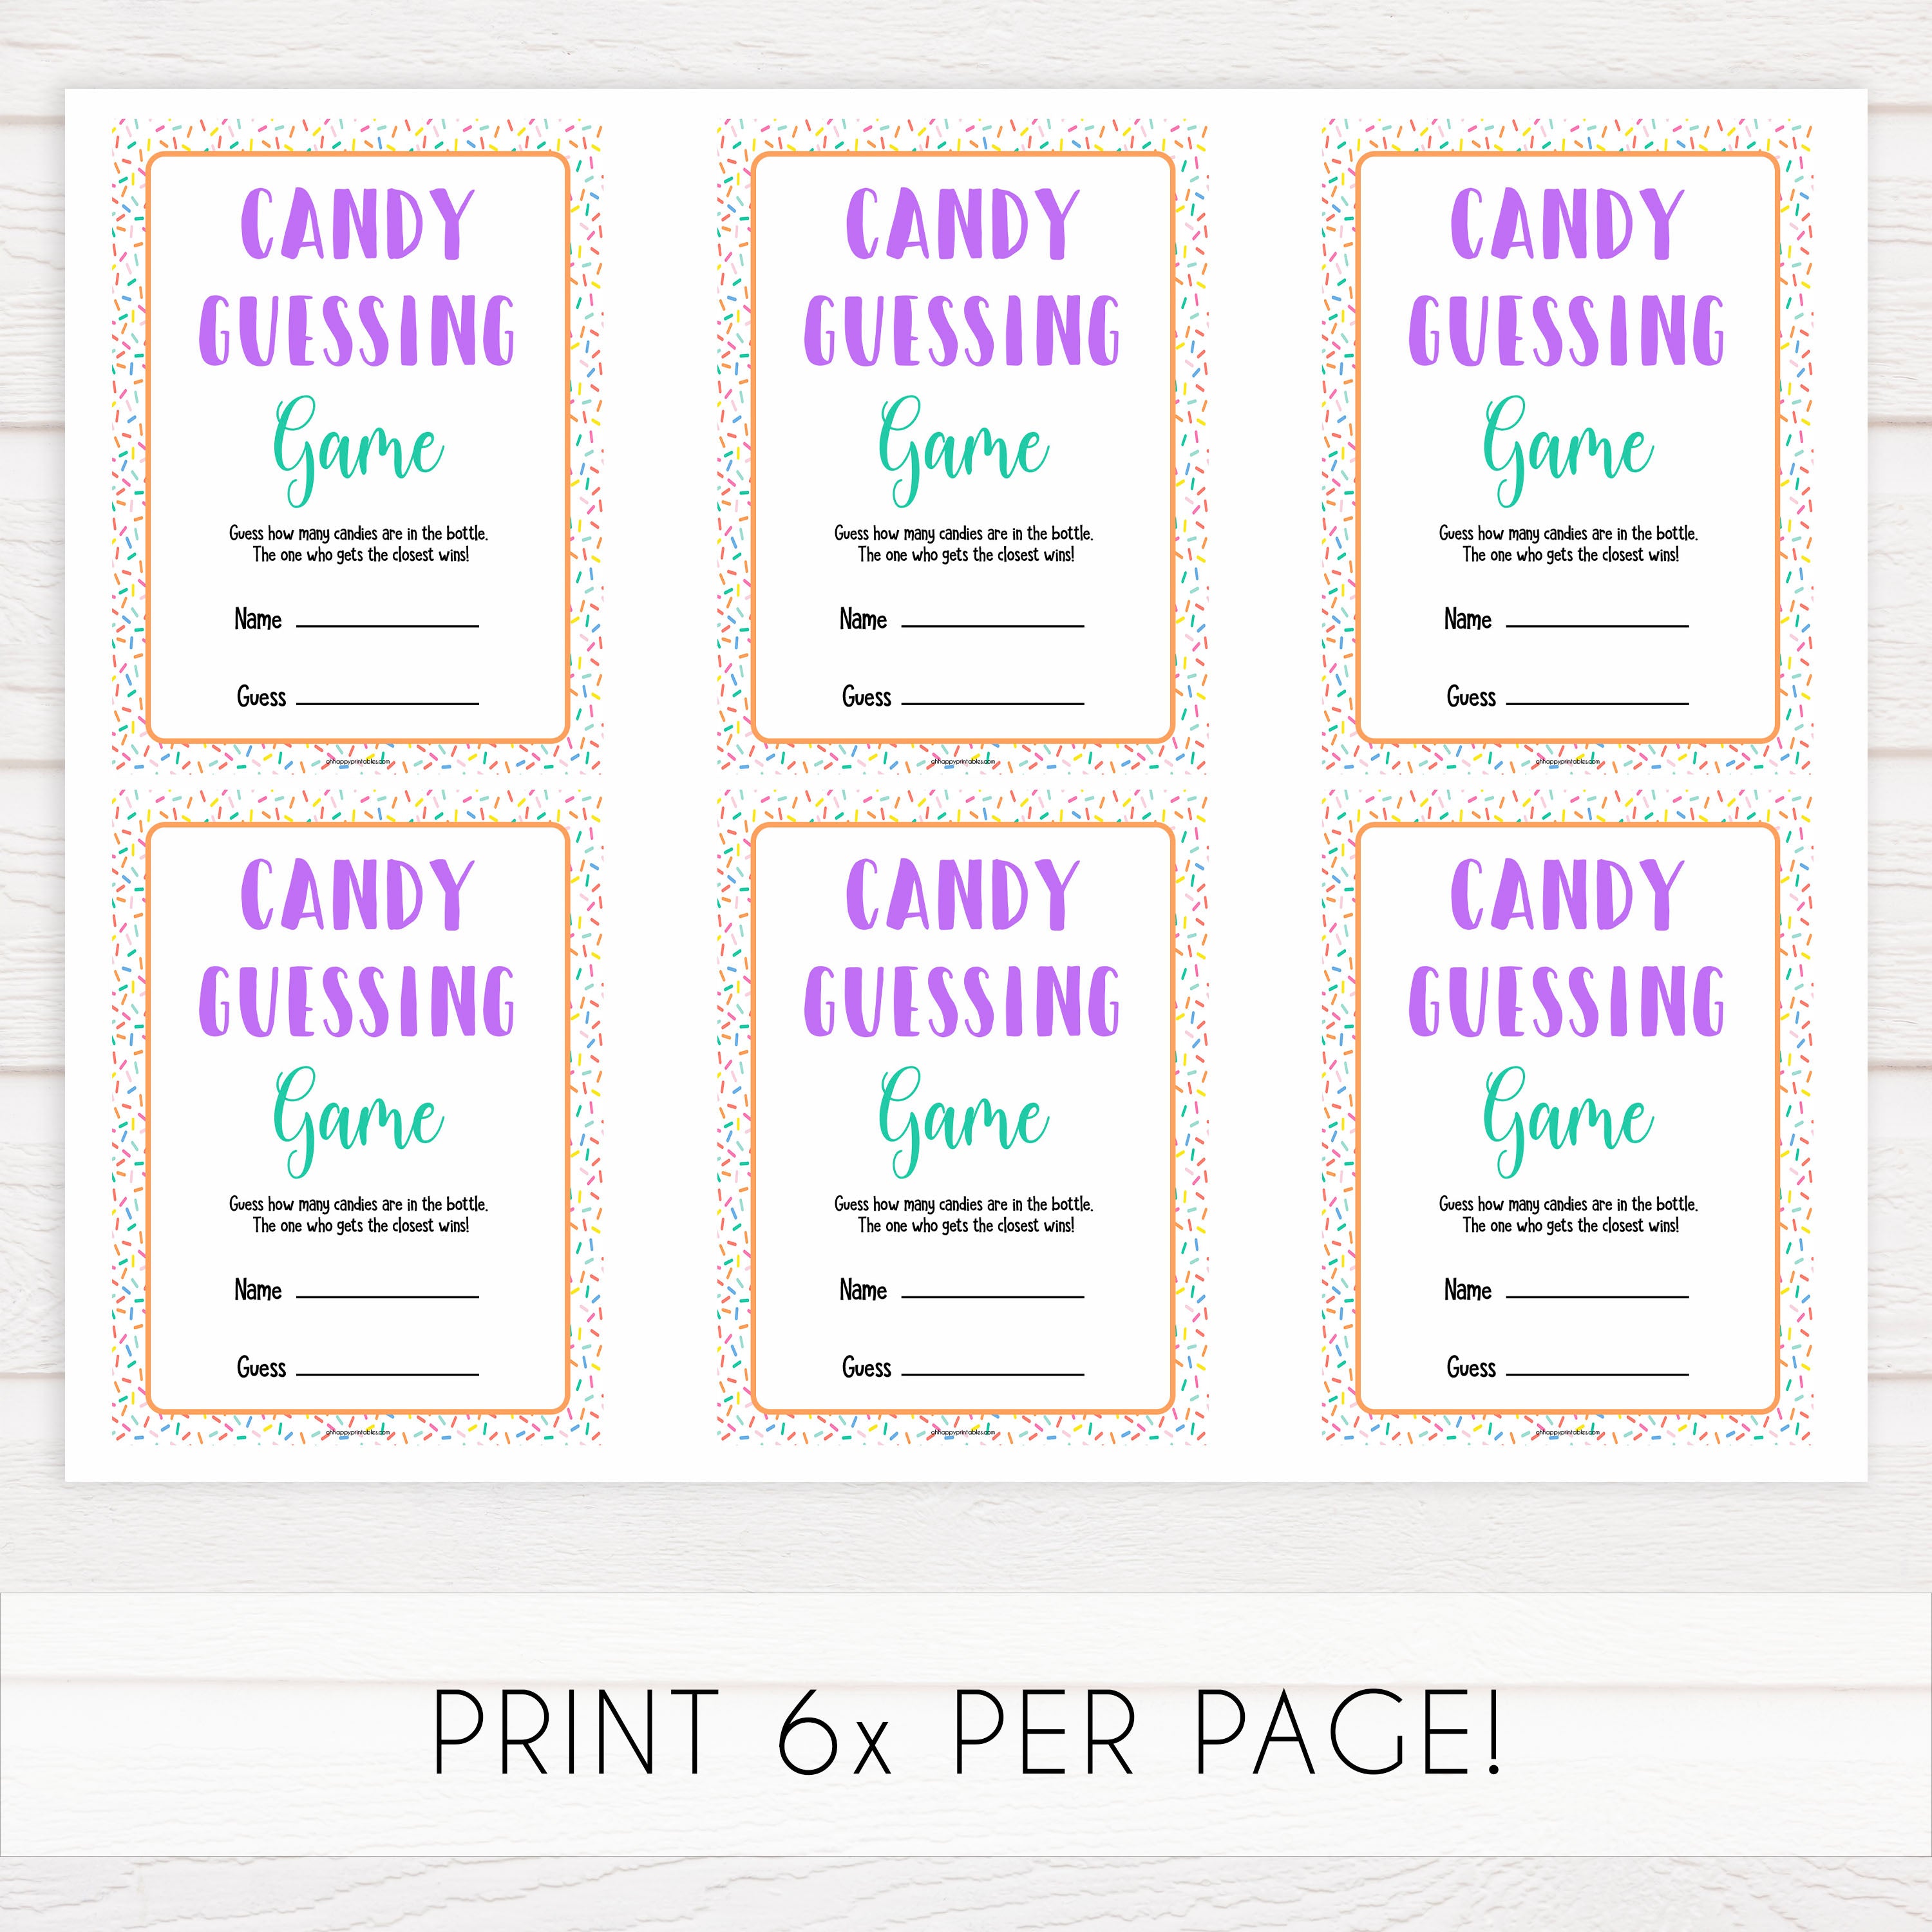 candy guessing game, Printable baby shower games, baby sprinkle fun baby games, baby shower games, fun baby shower ideas, top baby shower ideas, sprinkle shower baby shower, friends baby shower ideas